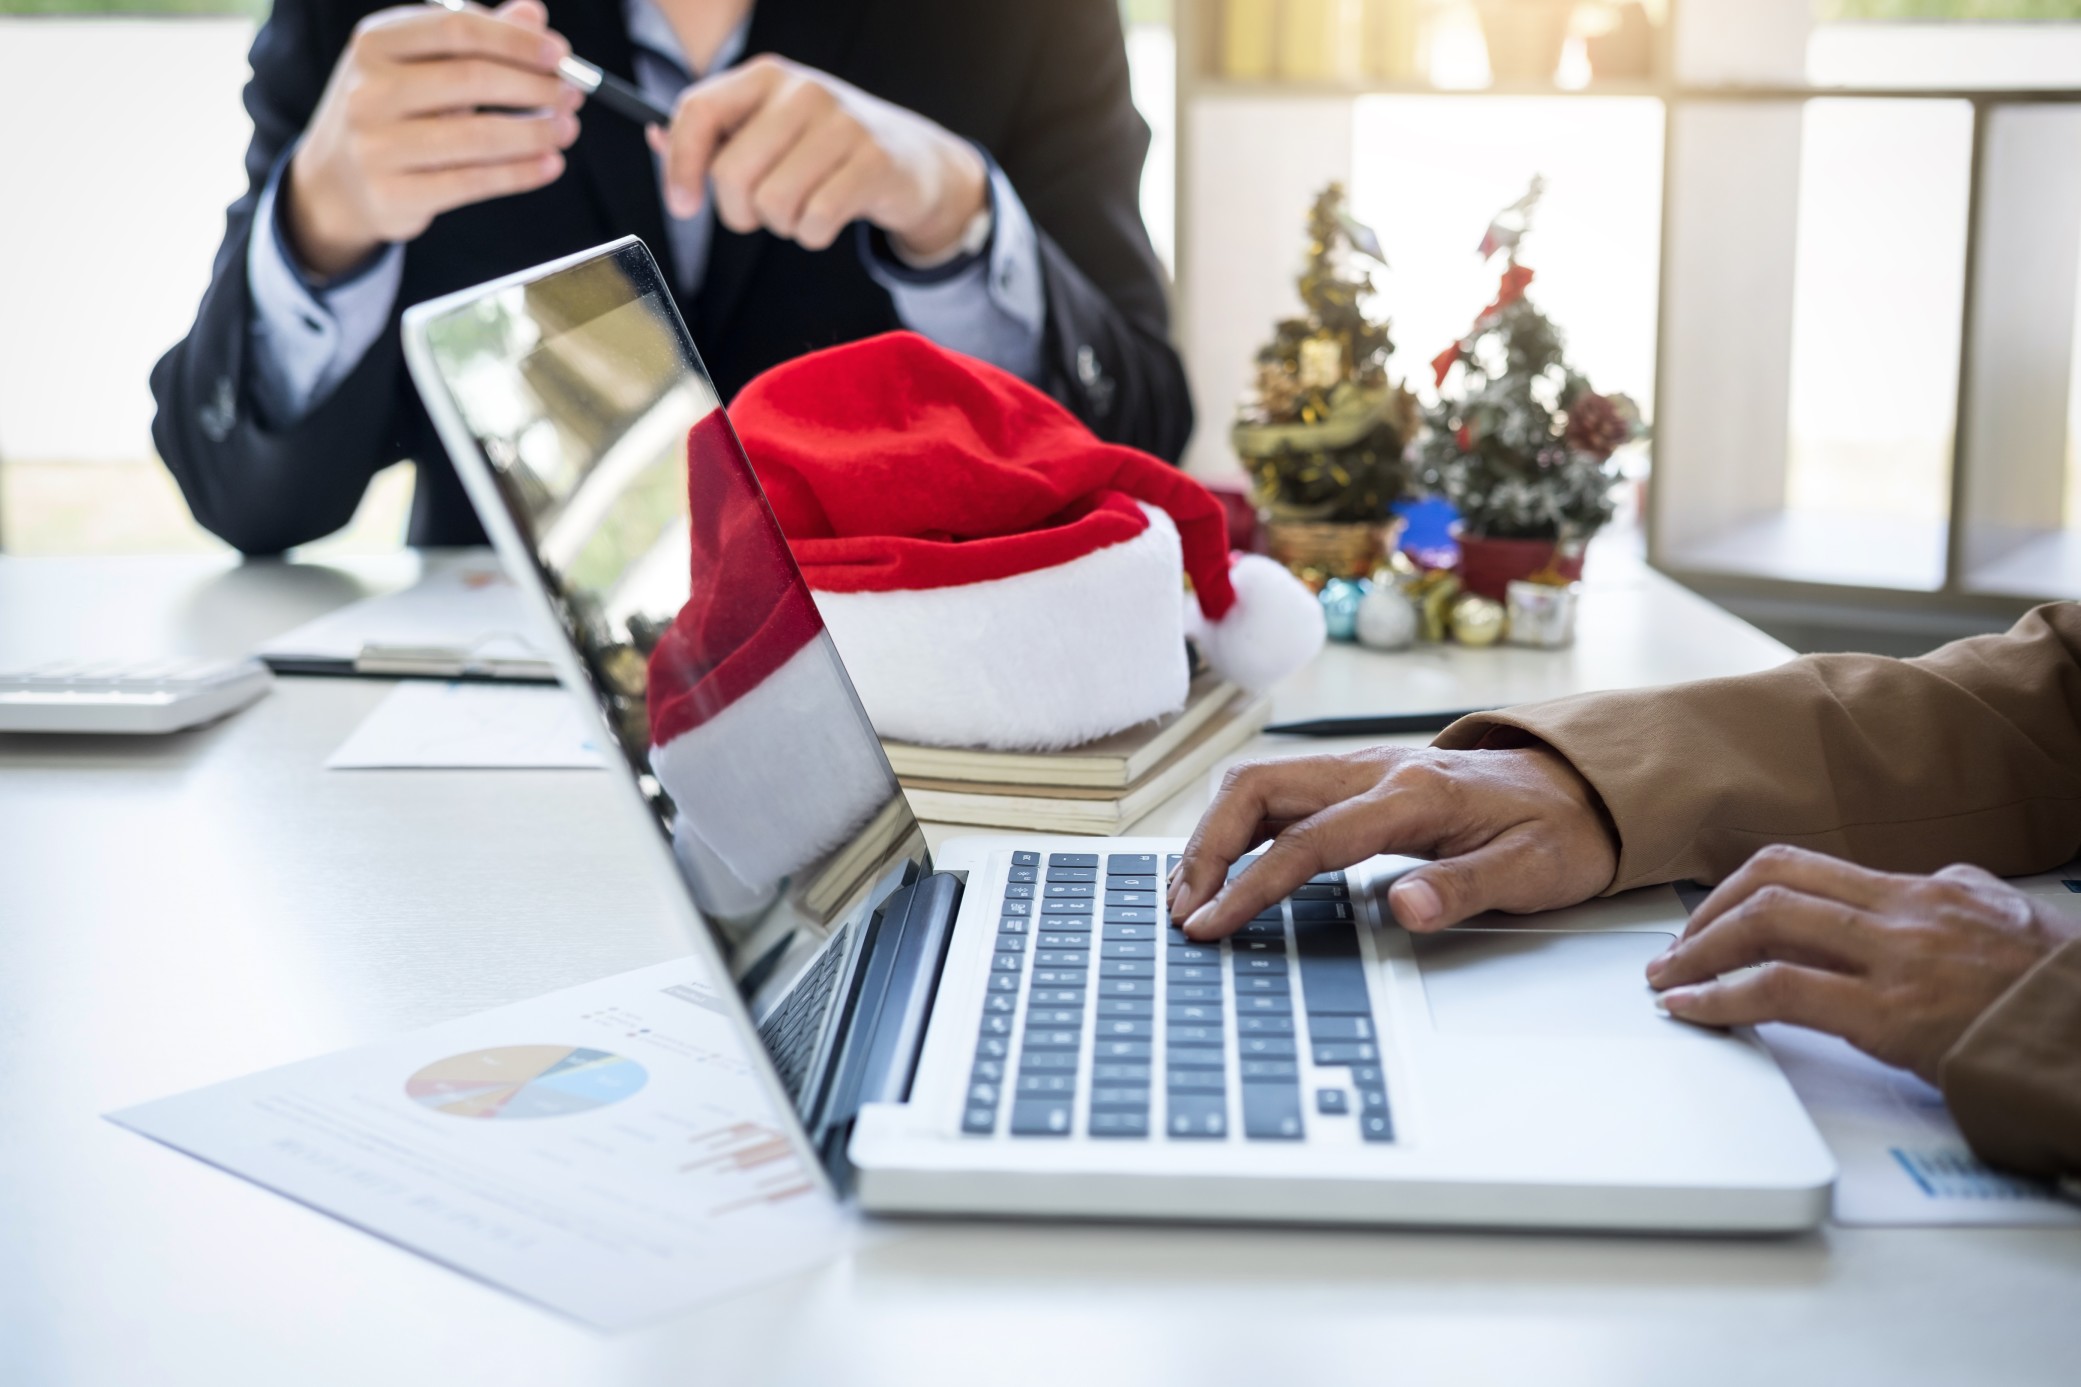 Surviving the holidays with your career intact